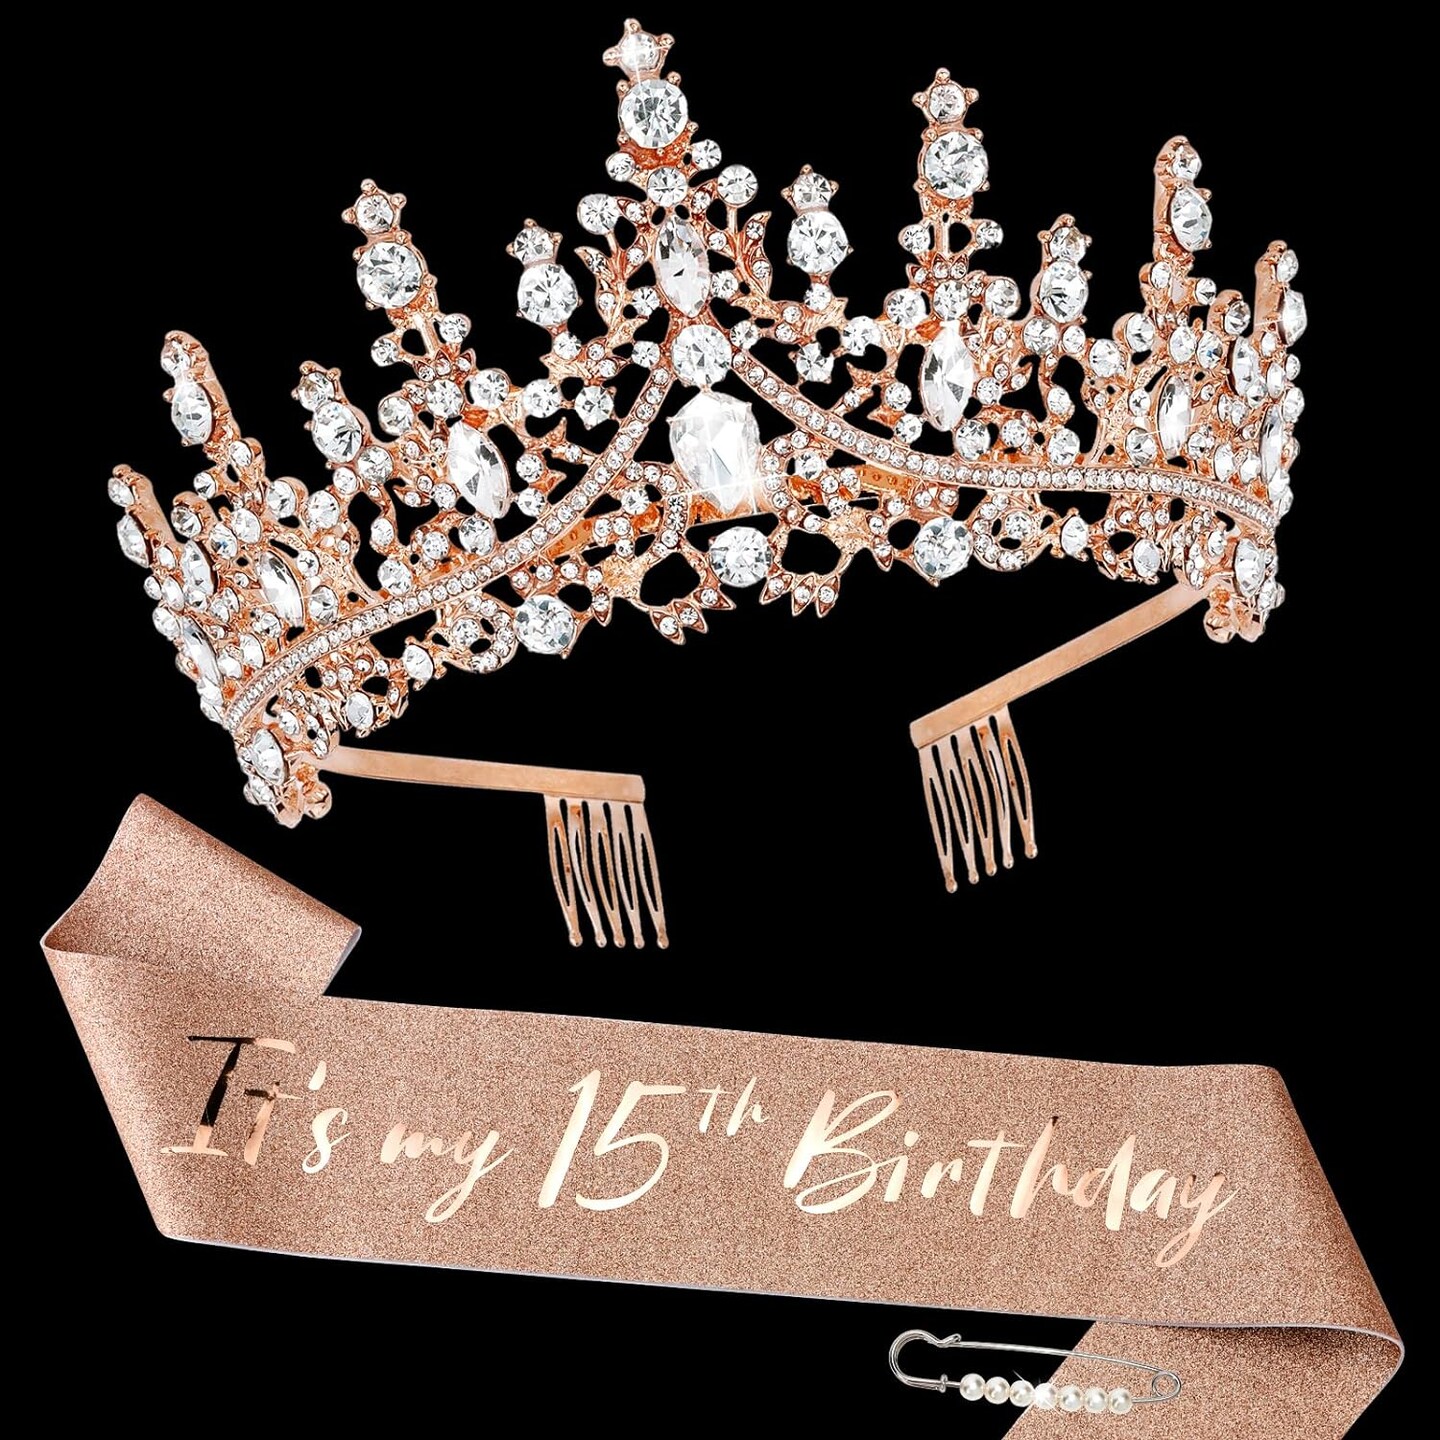 15 Birthday Decorations for Girls, Rose Gold Birthday Sash and Tiara for Girls, It&#x27;s My 15th Birthday Decorations for Girls, Quinceanera Crown Fabulous Birthday Party Favor Supplies for Girls